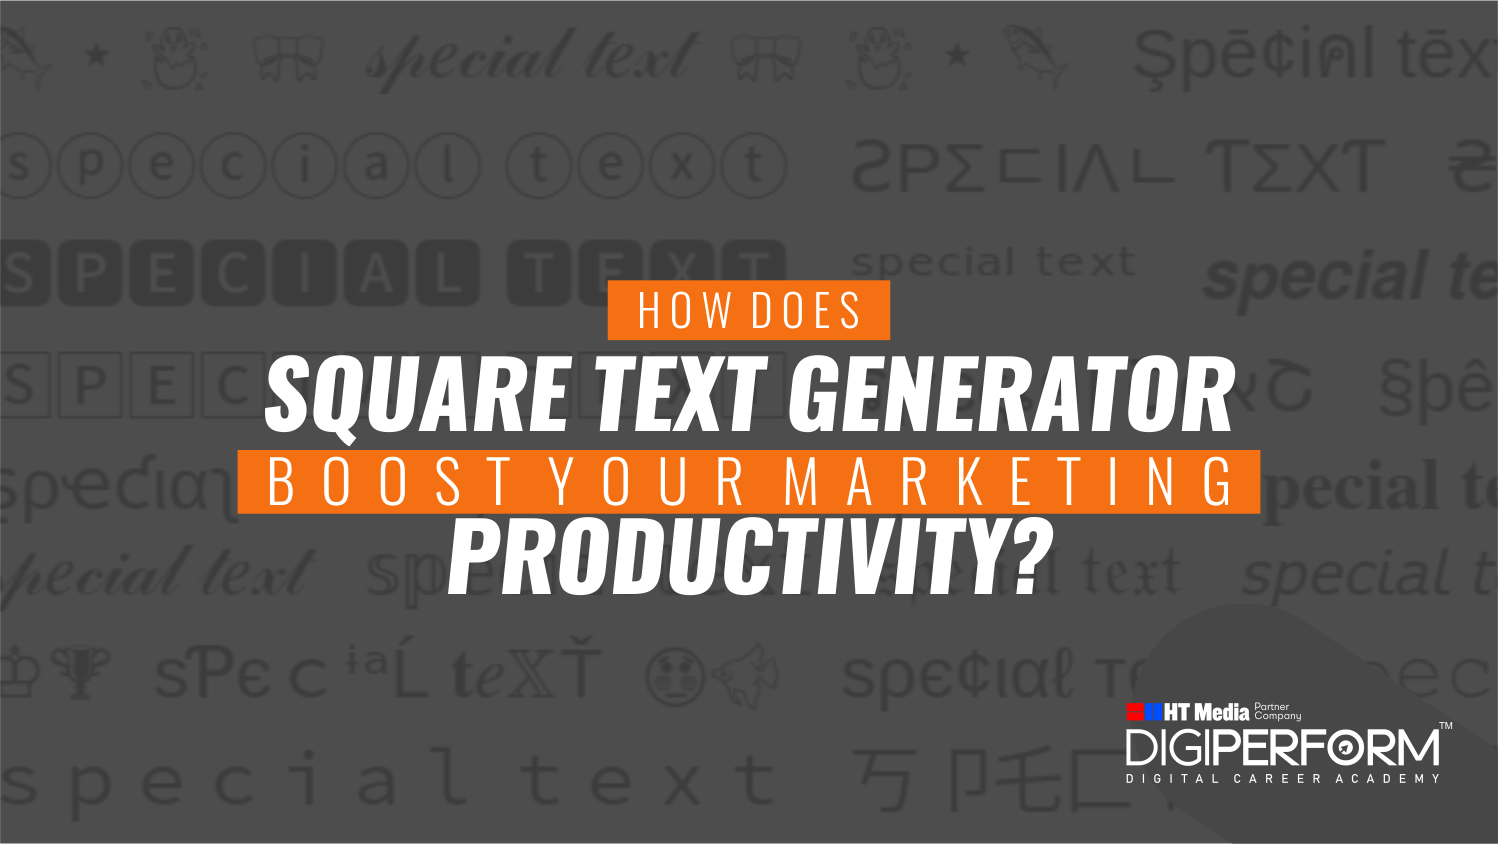 How Does Square Text Generator Boost Your Marketing Productivity?